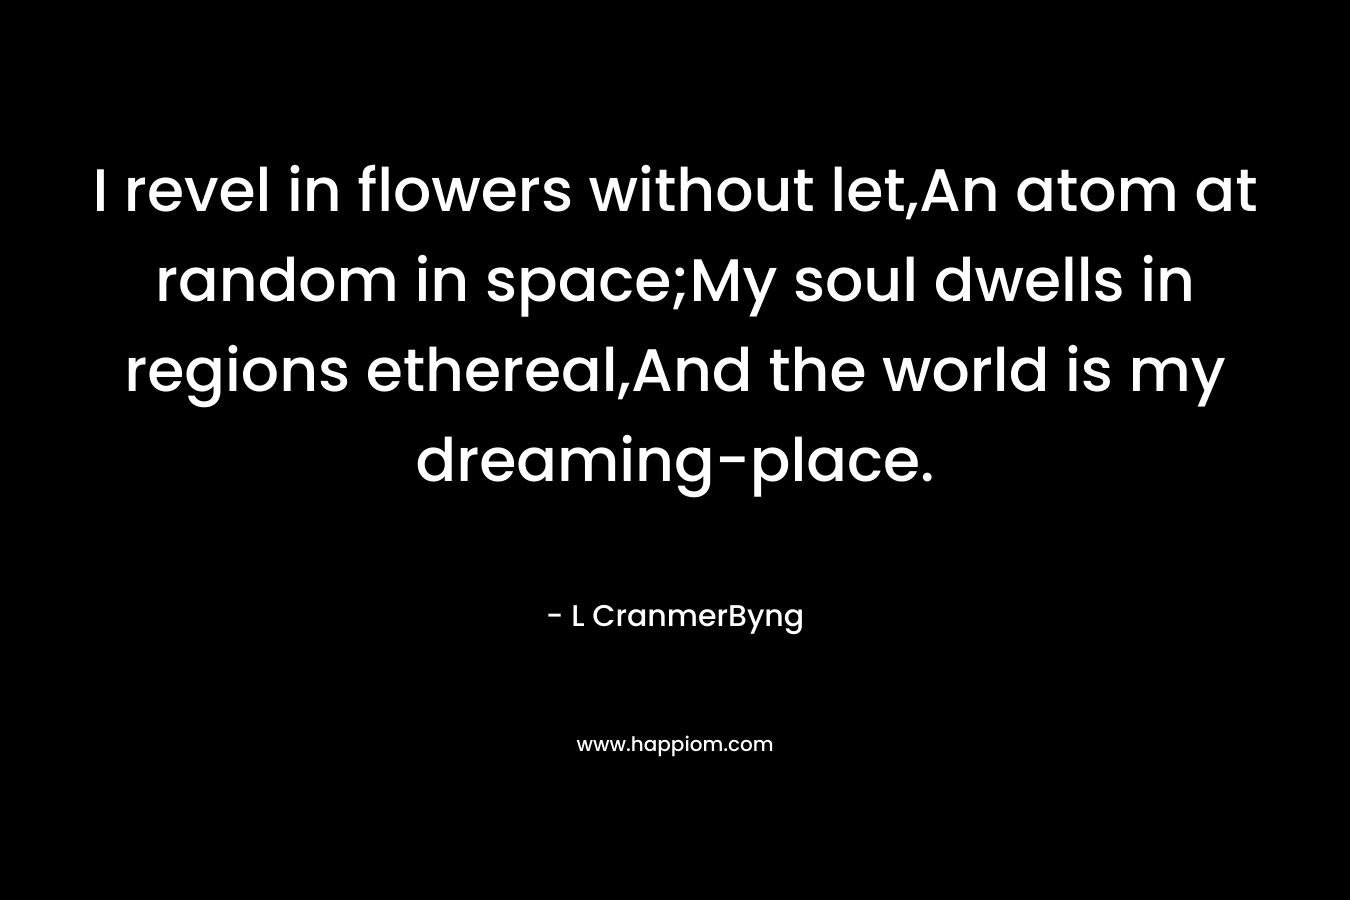 I revel in flowers without let,An atom at random in space;My soul dwells in regions ethereal,And the world is my dreaming-place.